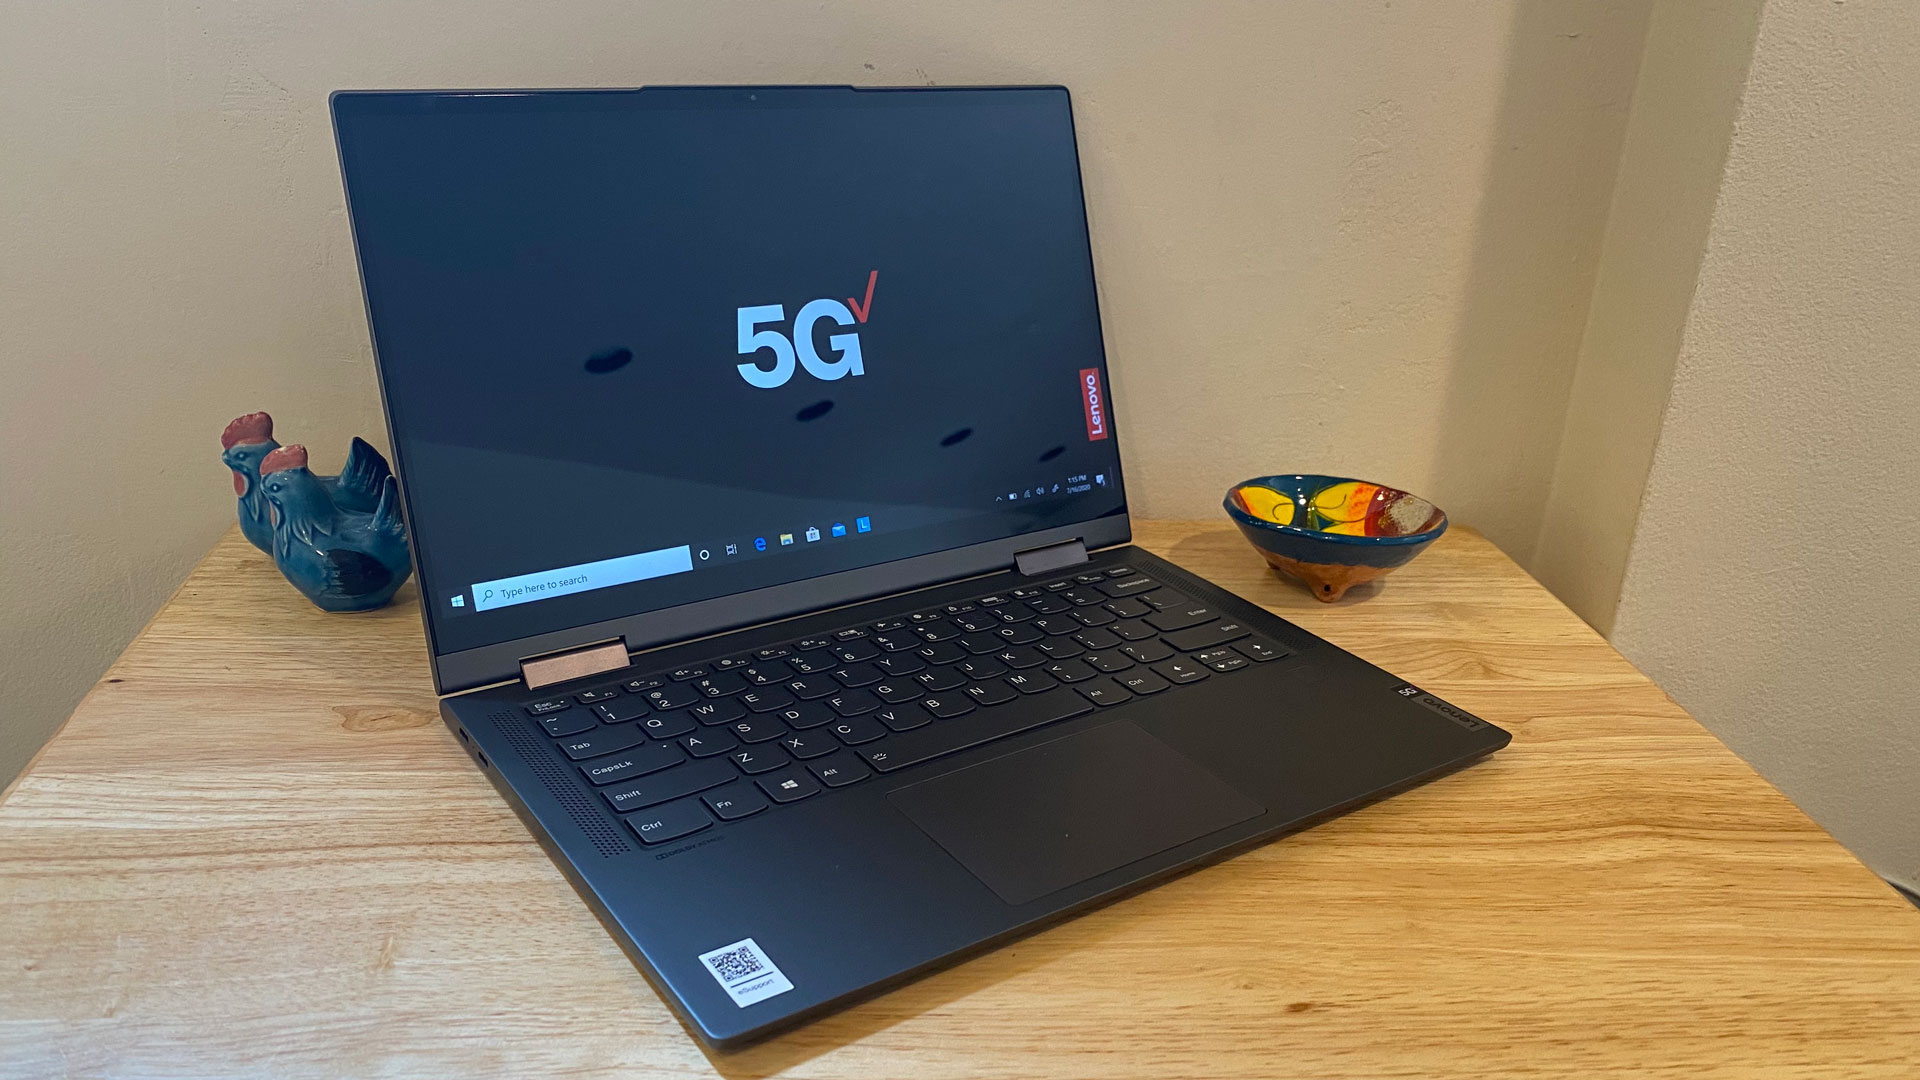 Lenovo Flex 5G Review: Solid Arm Laptop, but 5G Isn't Ready | Tom's Hardware